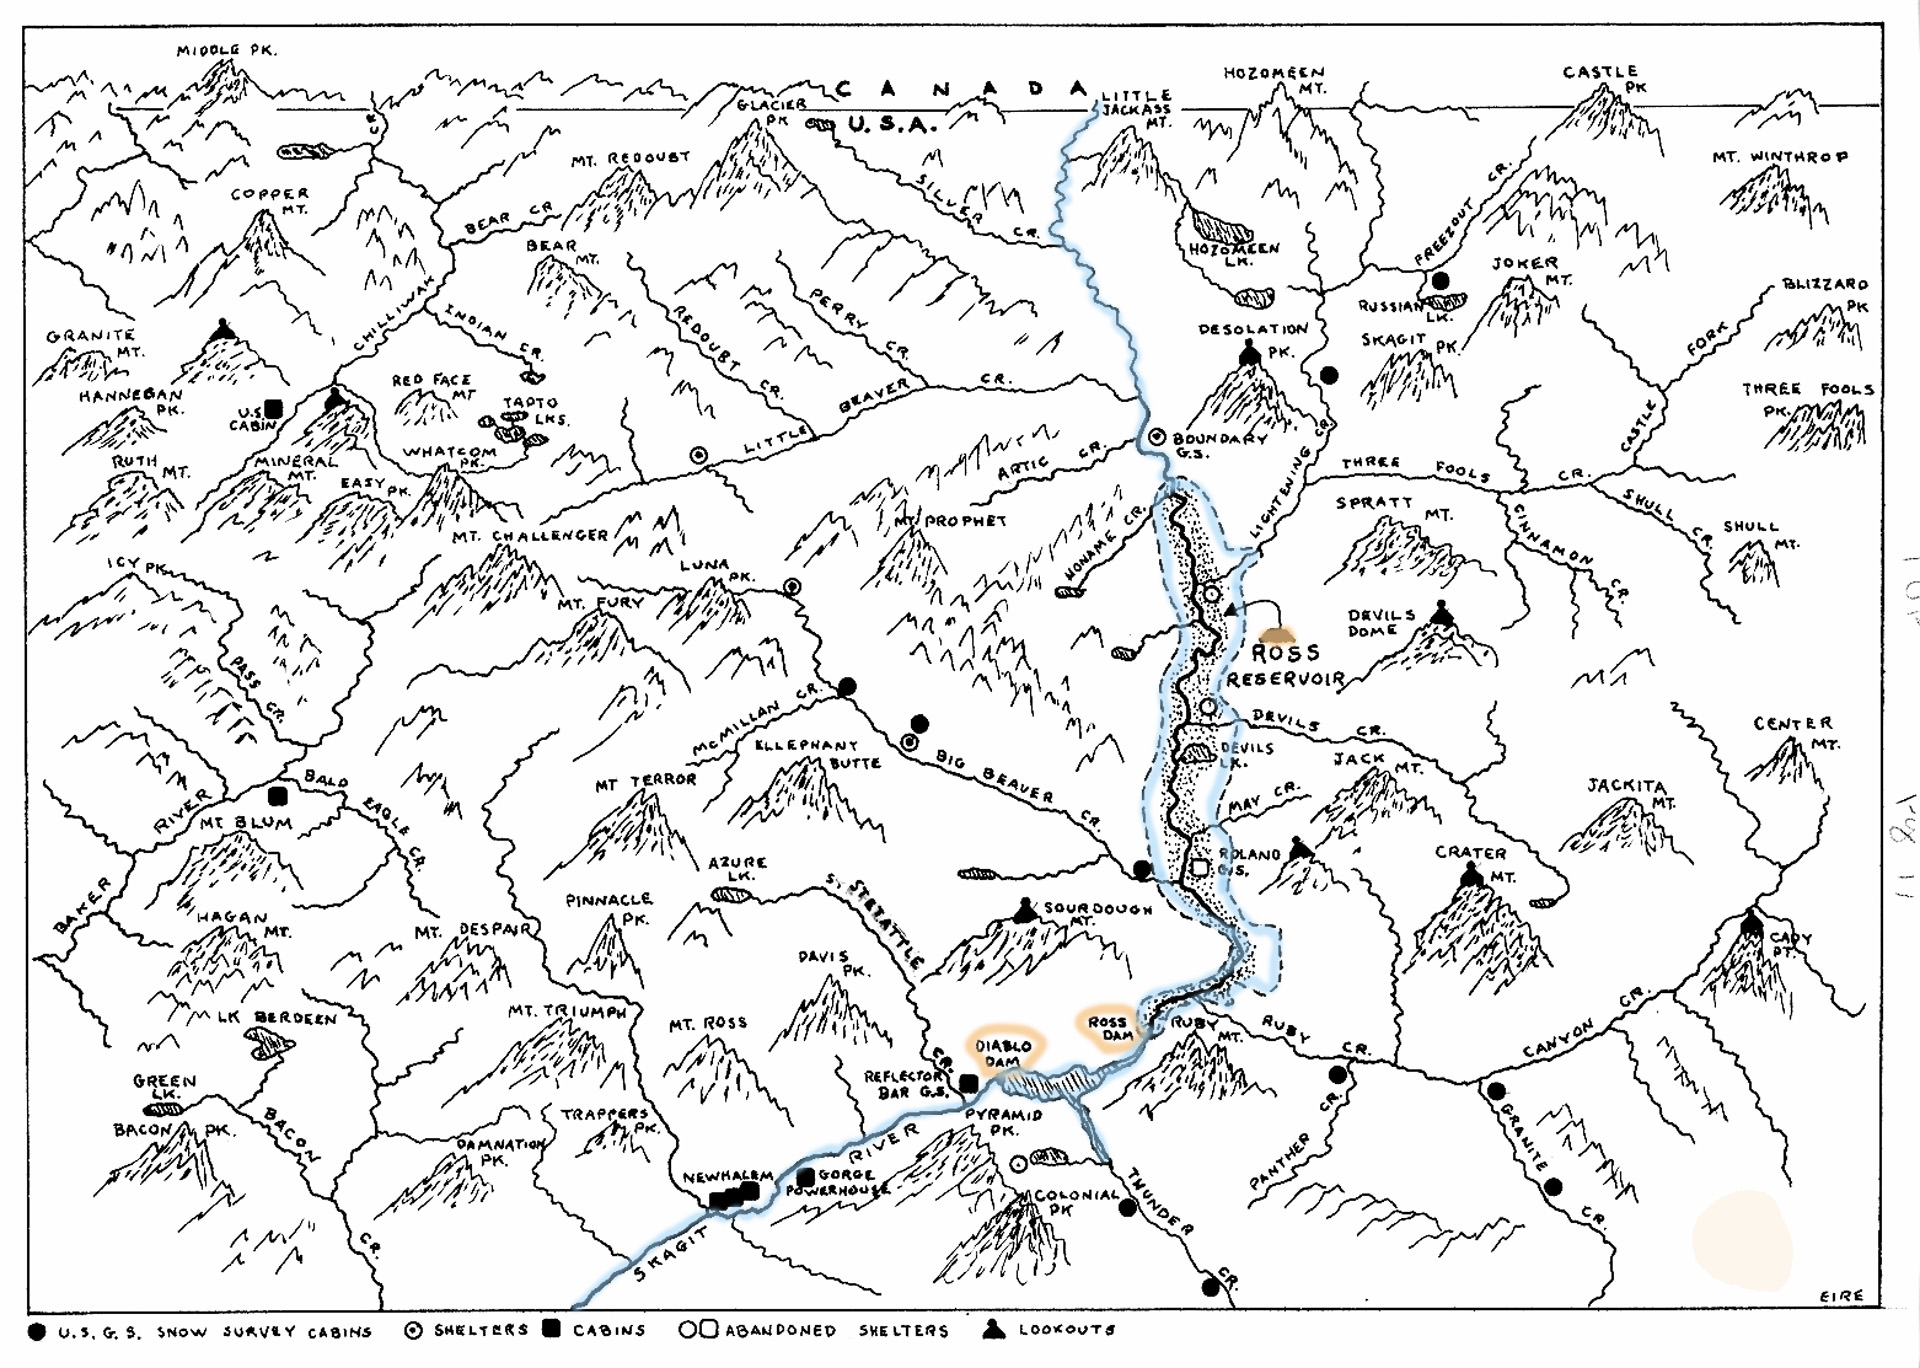 Skagit Watershed Historic Sketch Map ~ 1940s